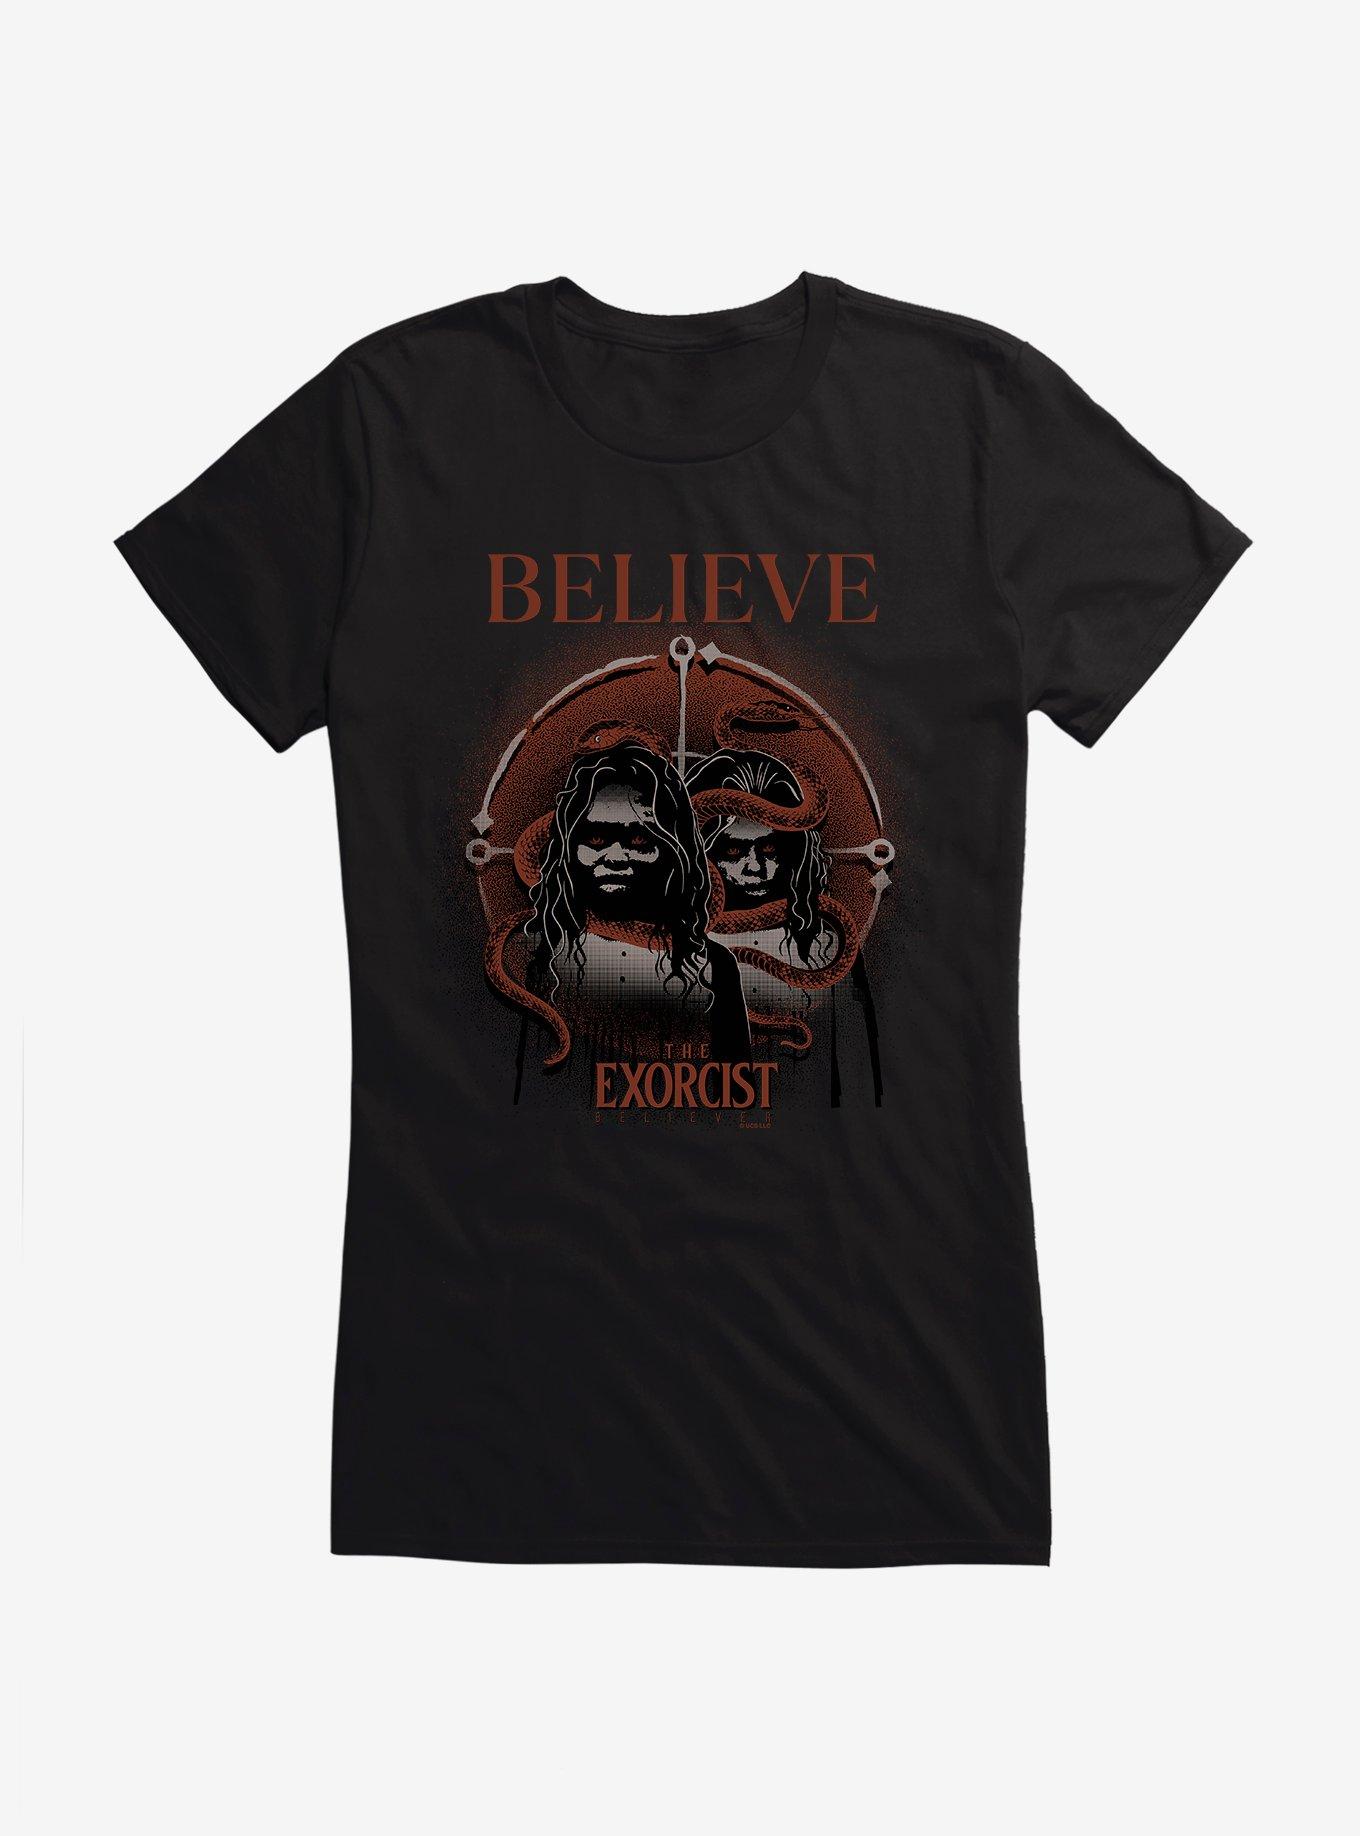 The Exorcist Believer Believe Girls T-Shirt